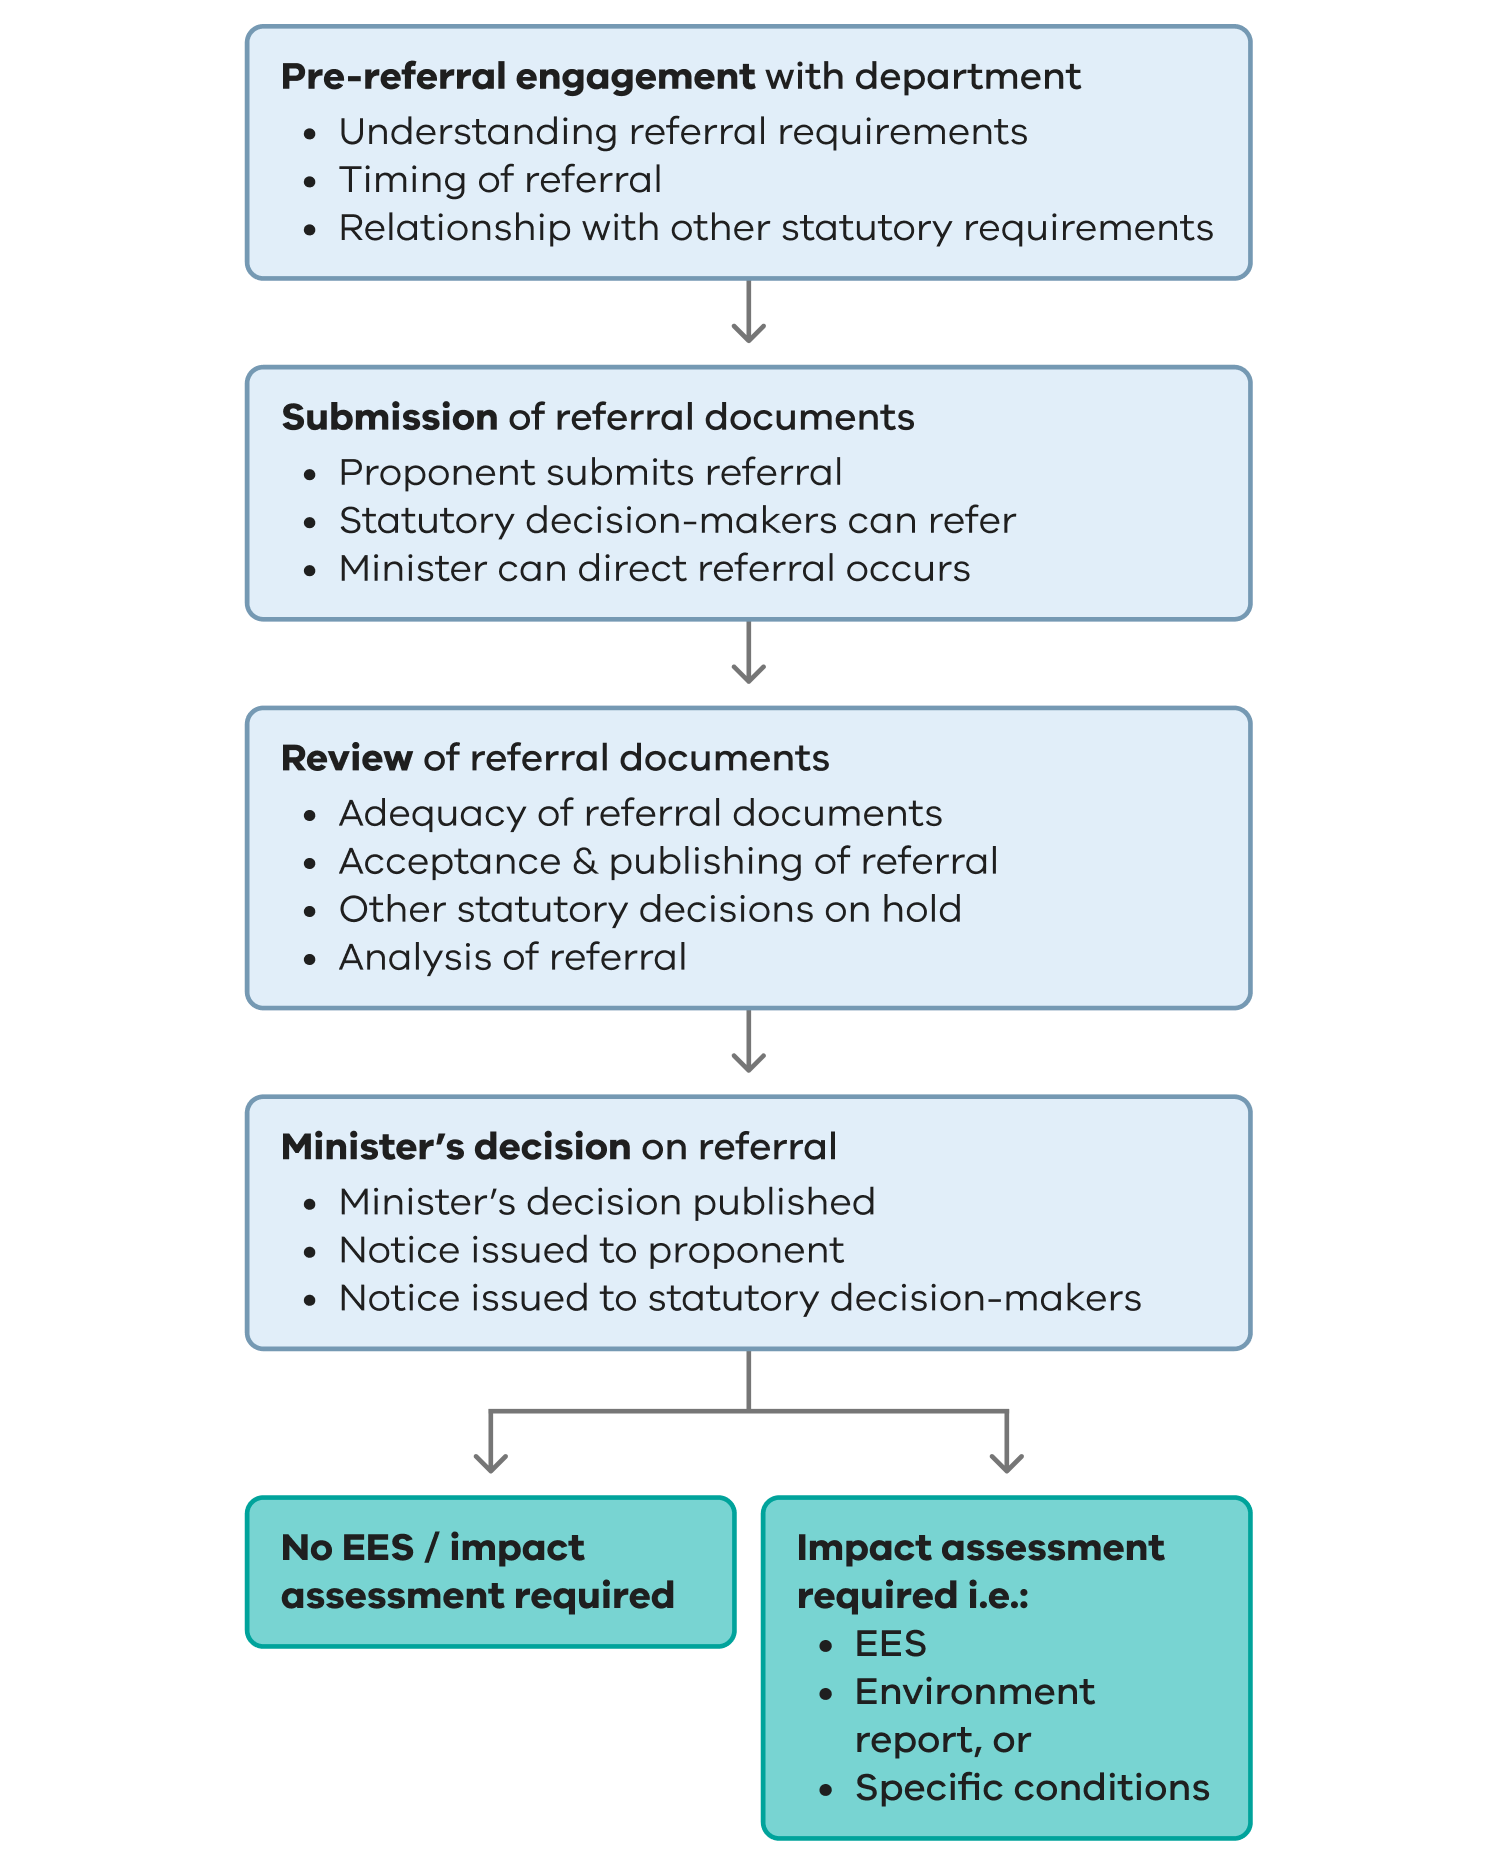 Figure 2. Referral process under the Environment Effects Act